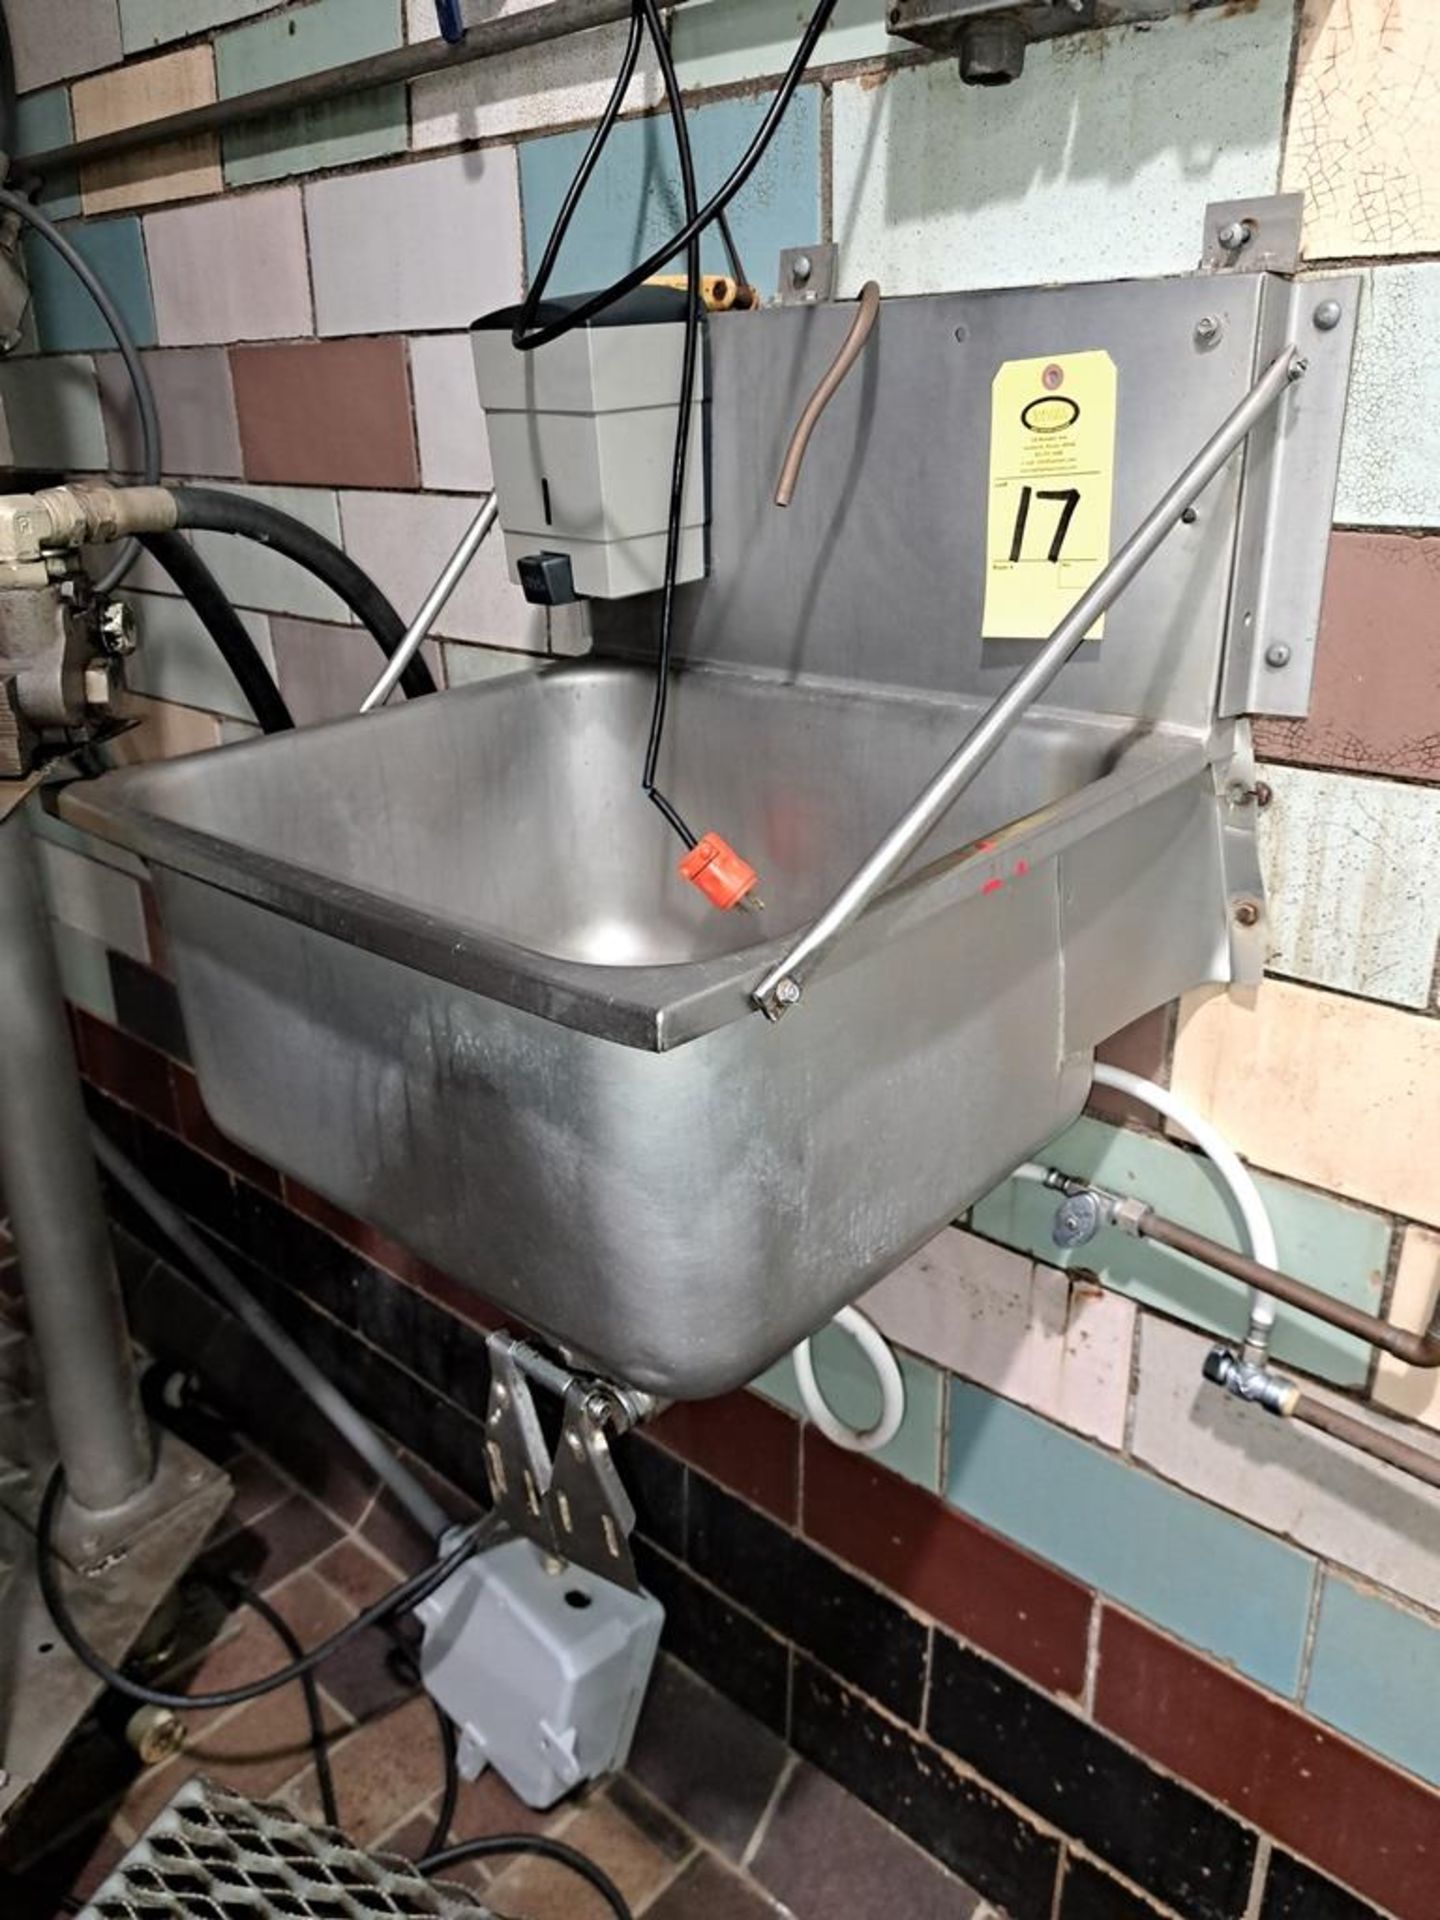 Stainless Steel Hand Wash Sink, knee paddle activated (Required Loading Fee $100.00 Rigger: Norm